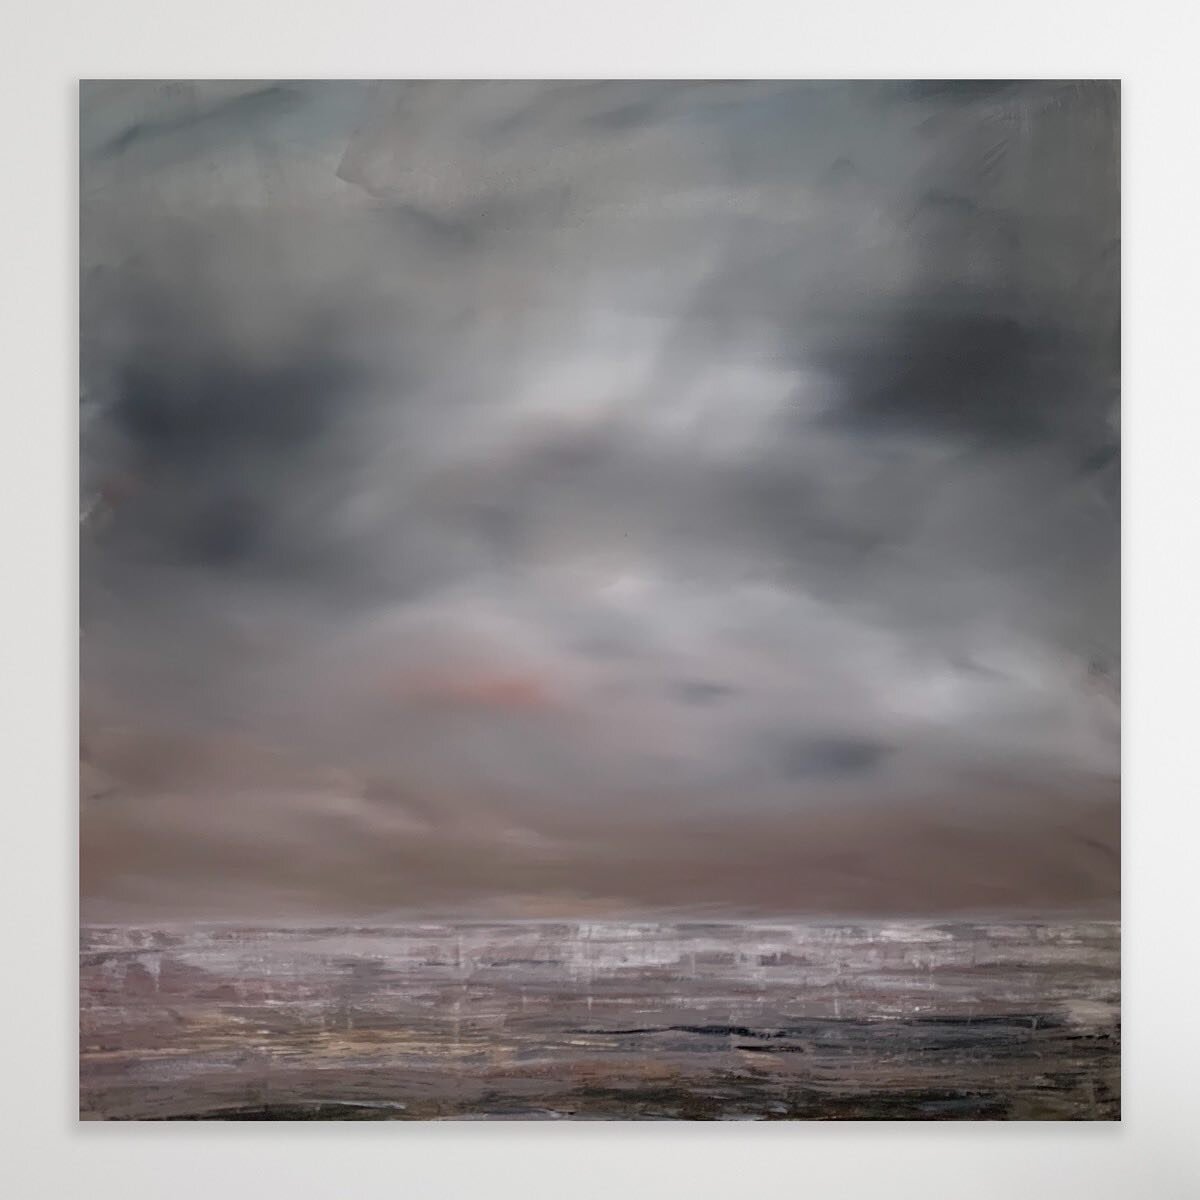 &ldquo;I'd rather regret doing something than not doing something.&quot; - James Hetfield 
-
-
-
-

#scottmichaelart #landscapepainting #dailyquote #mindful #art #artist #horizon #earth #sky #artwork #cloud #acrylicpainting #landscapeart #atmosphere 